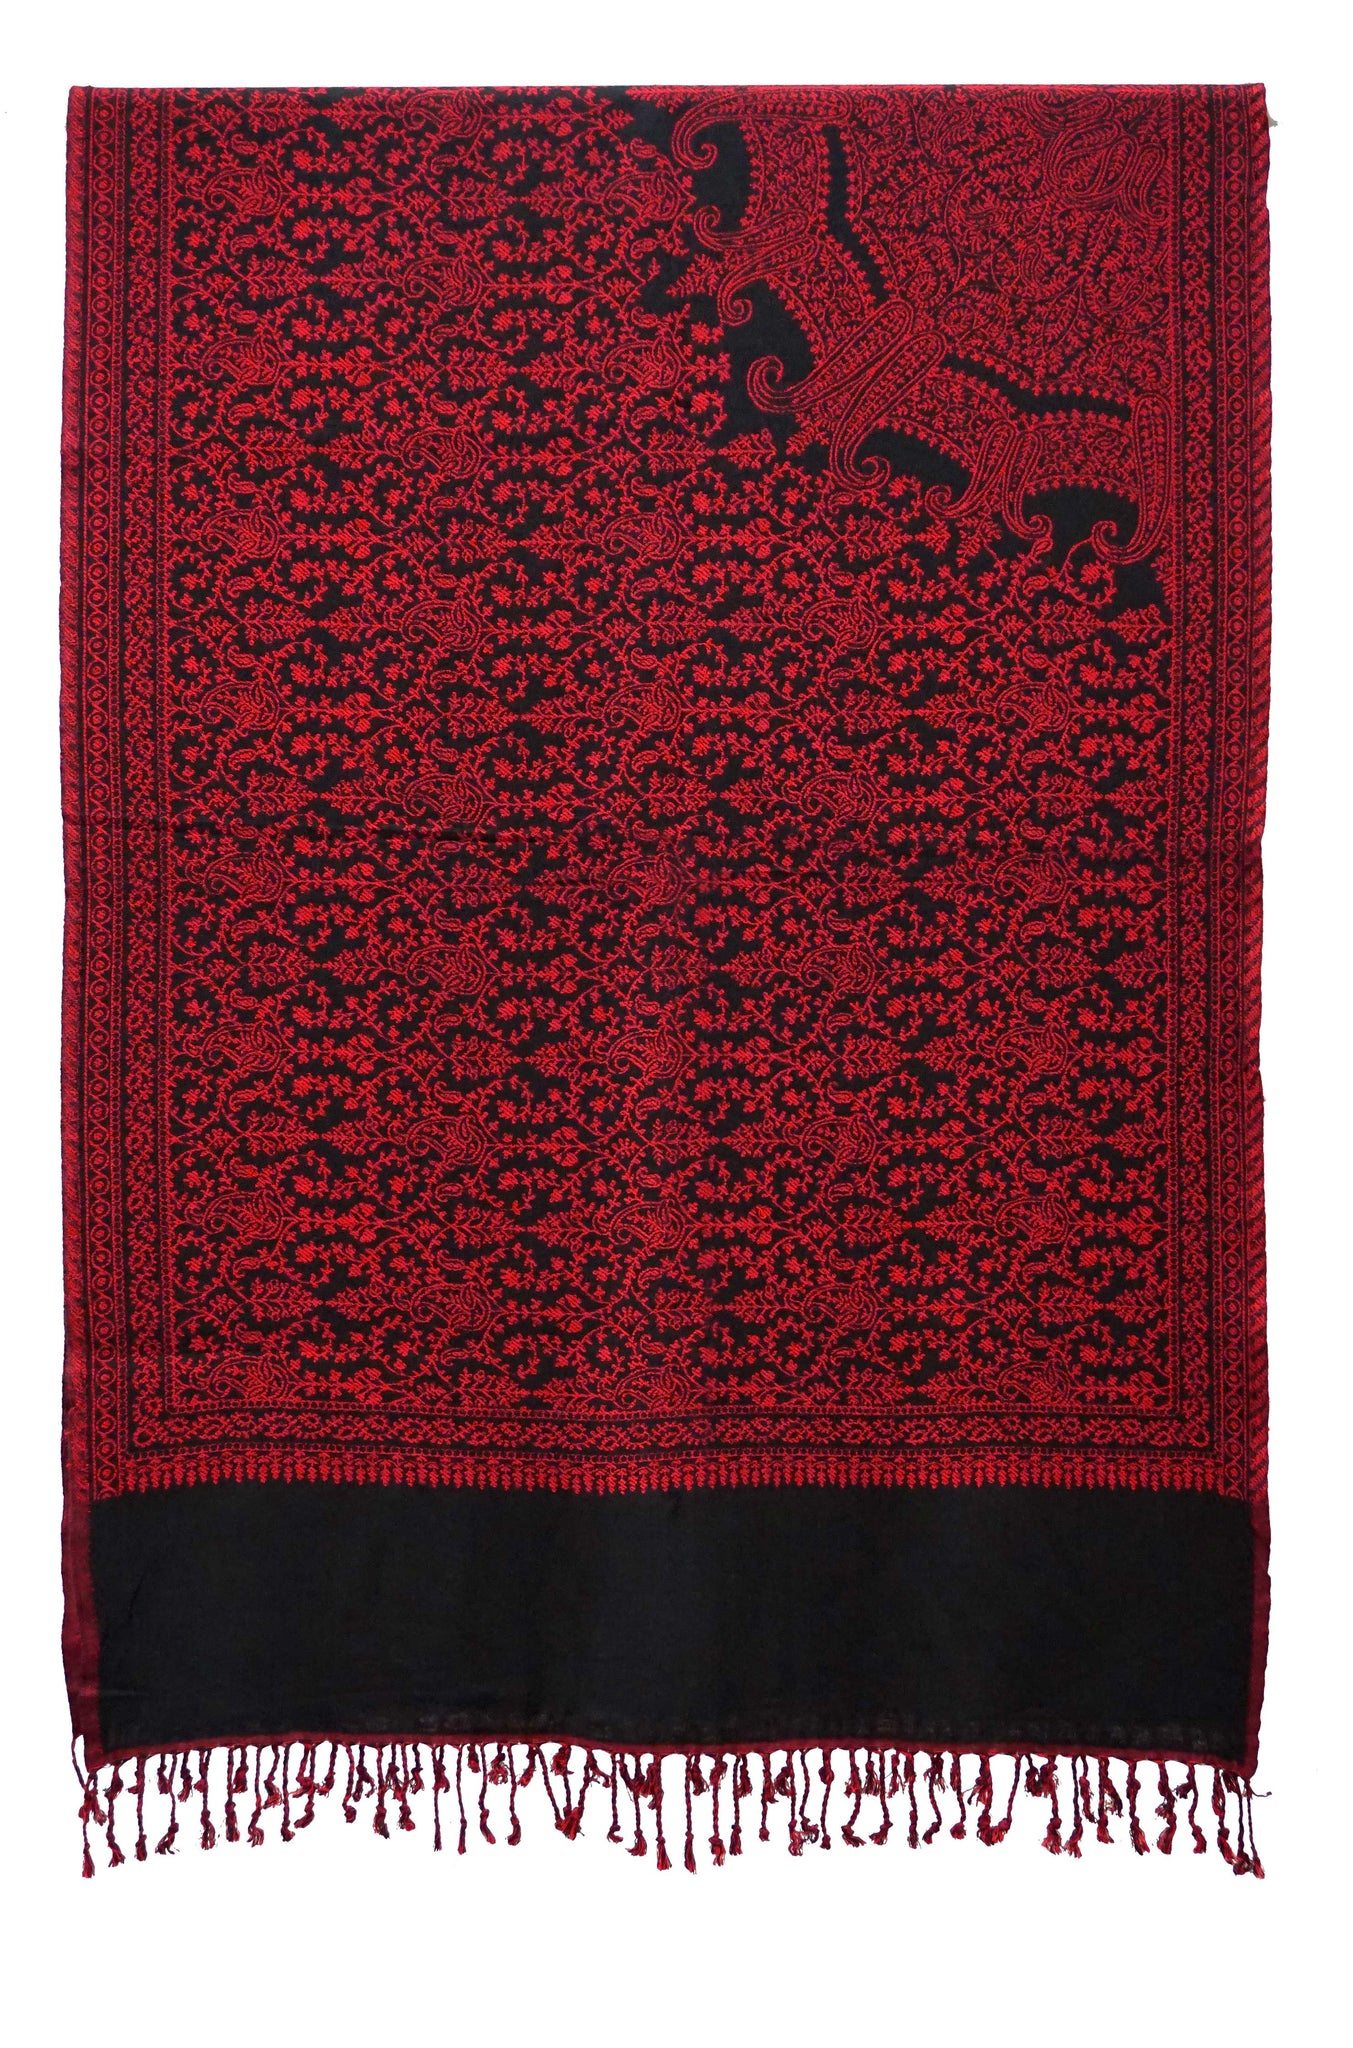 Fun viscose woven stole. Black and red jacquard - Marie-Pierre Rousseau